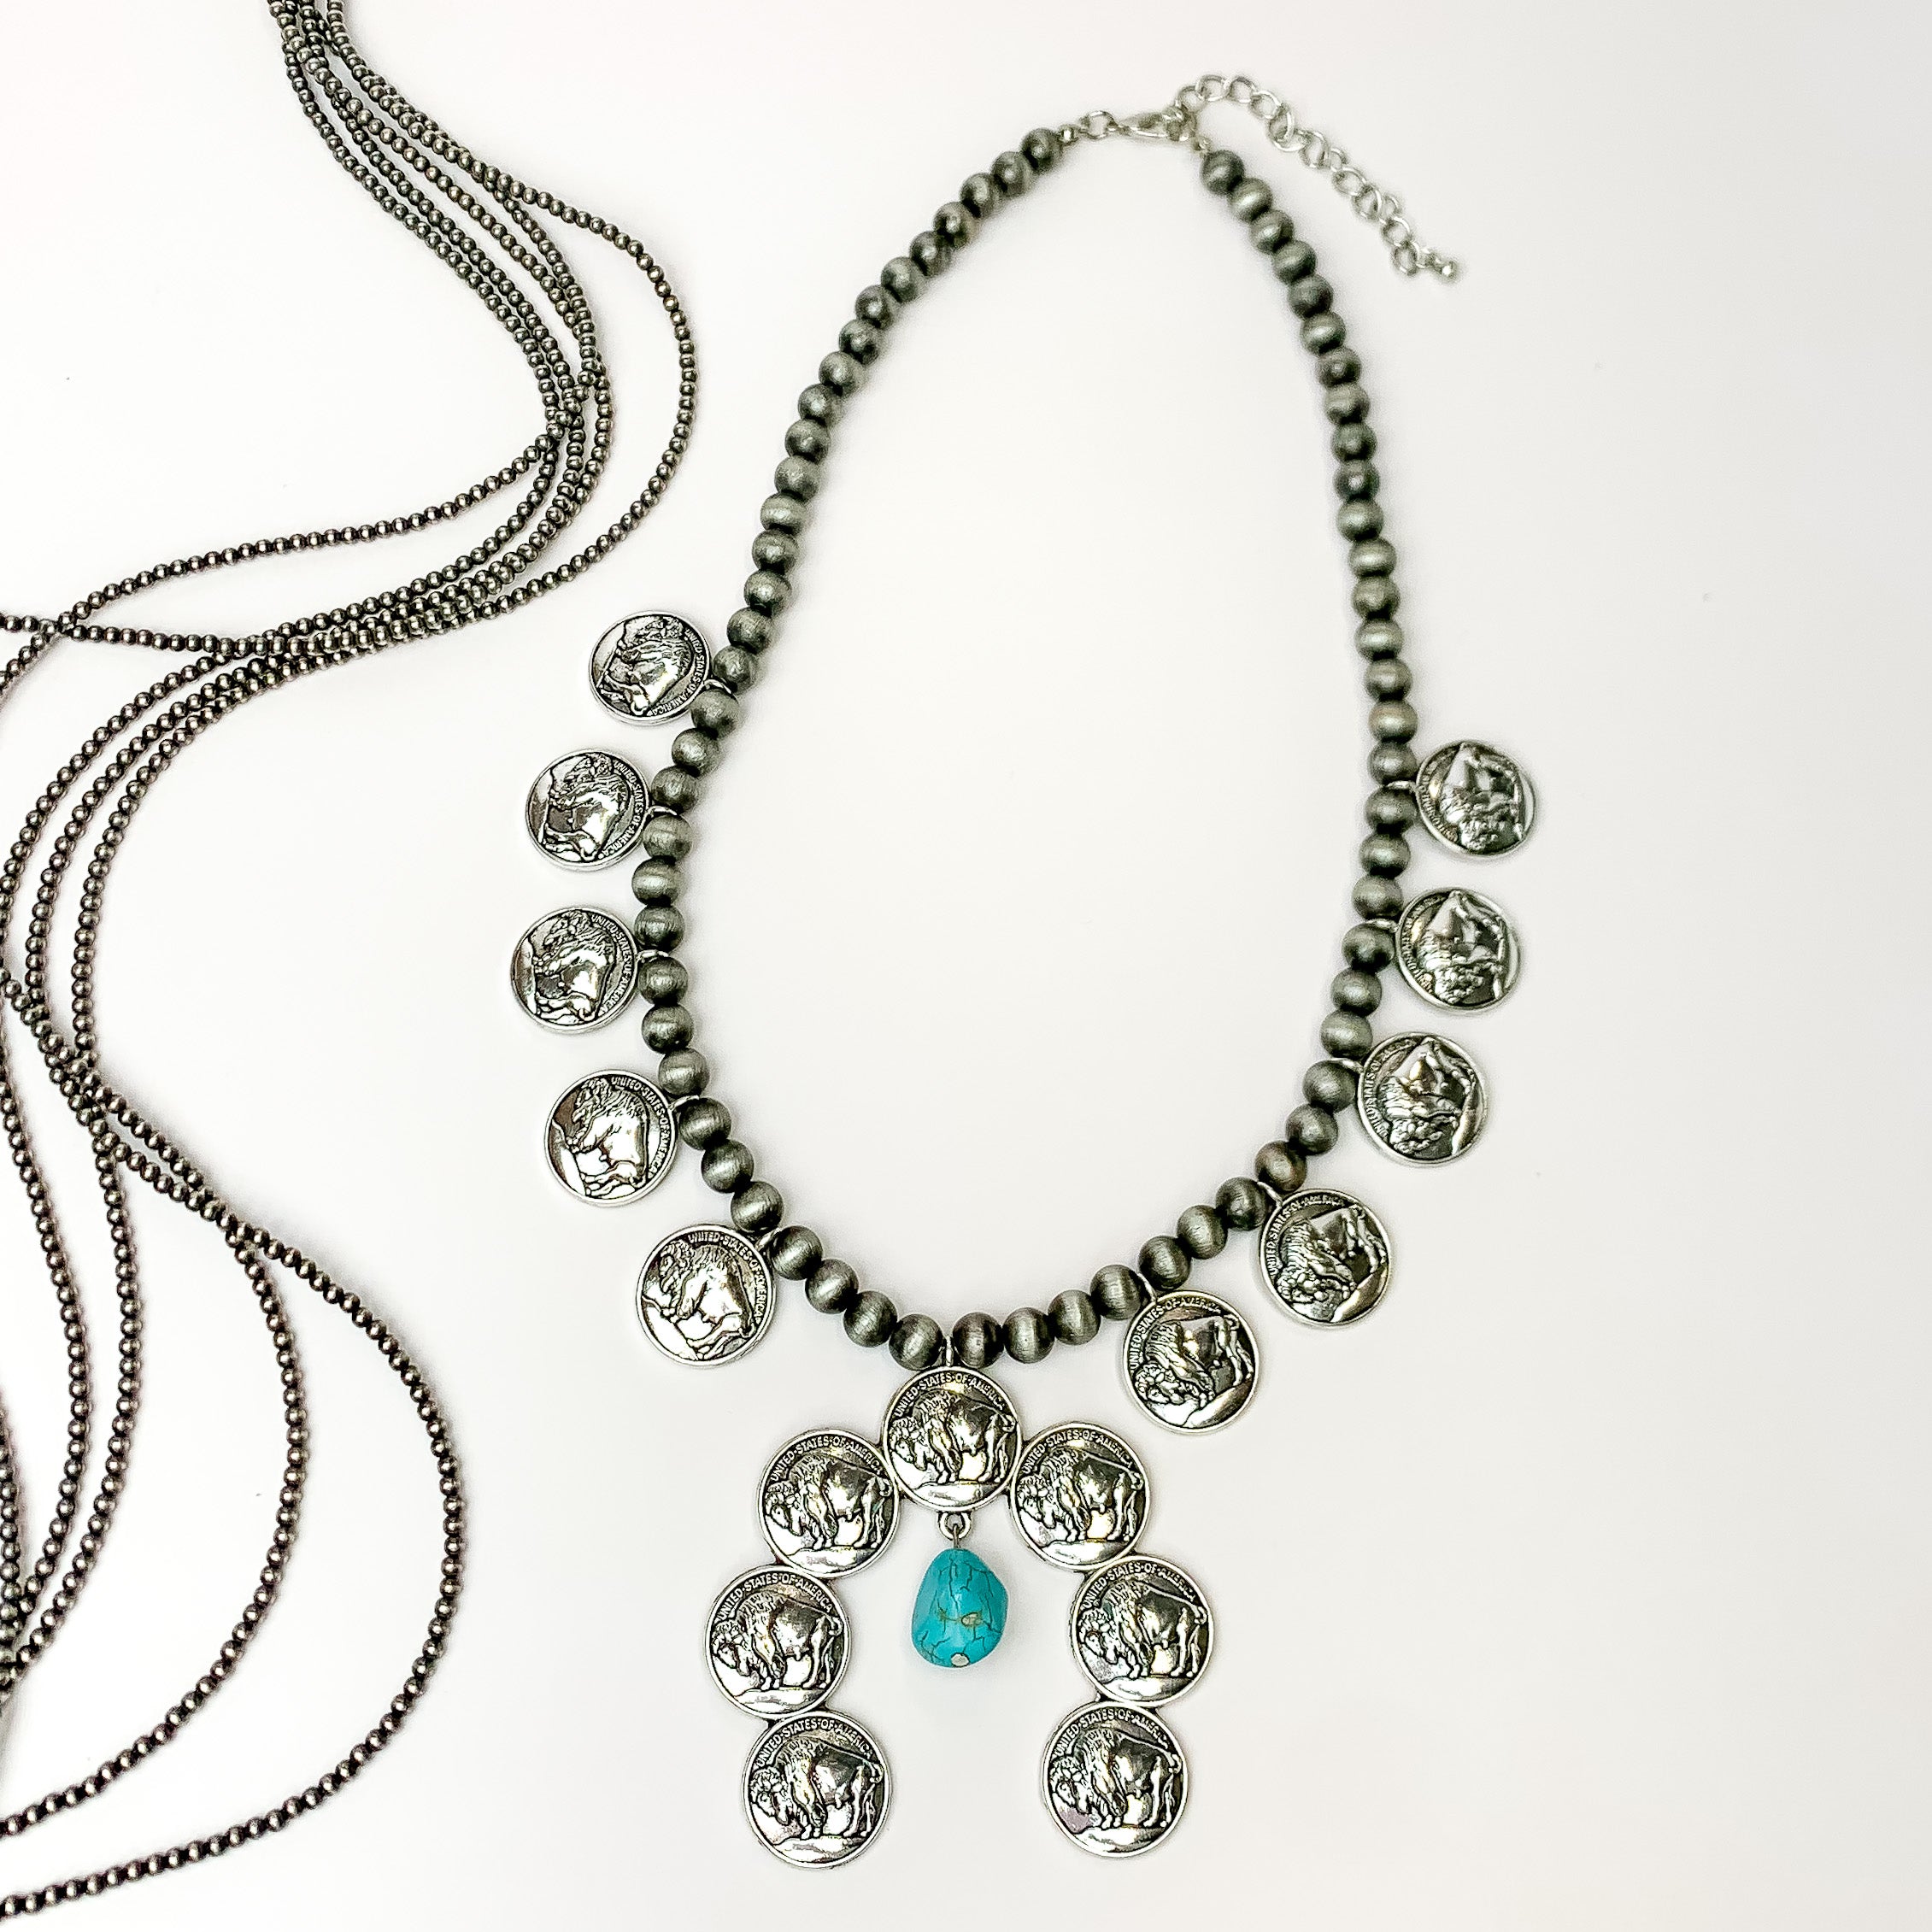 Faux Navajo pearl necklace with buffalo coins around it and a faux turquoise stone that dangles. Pictured on a white background with strands of Navajo pearls next to it.